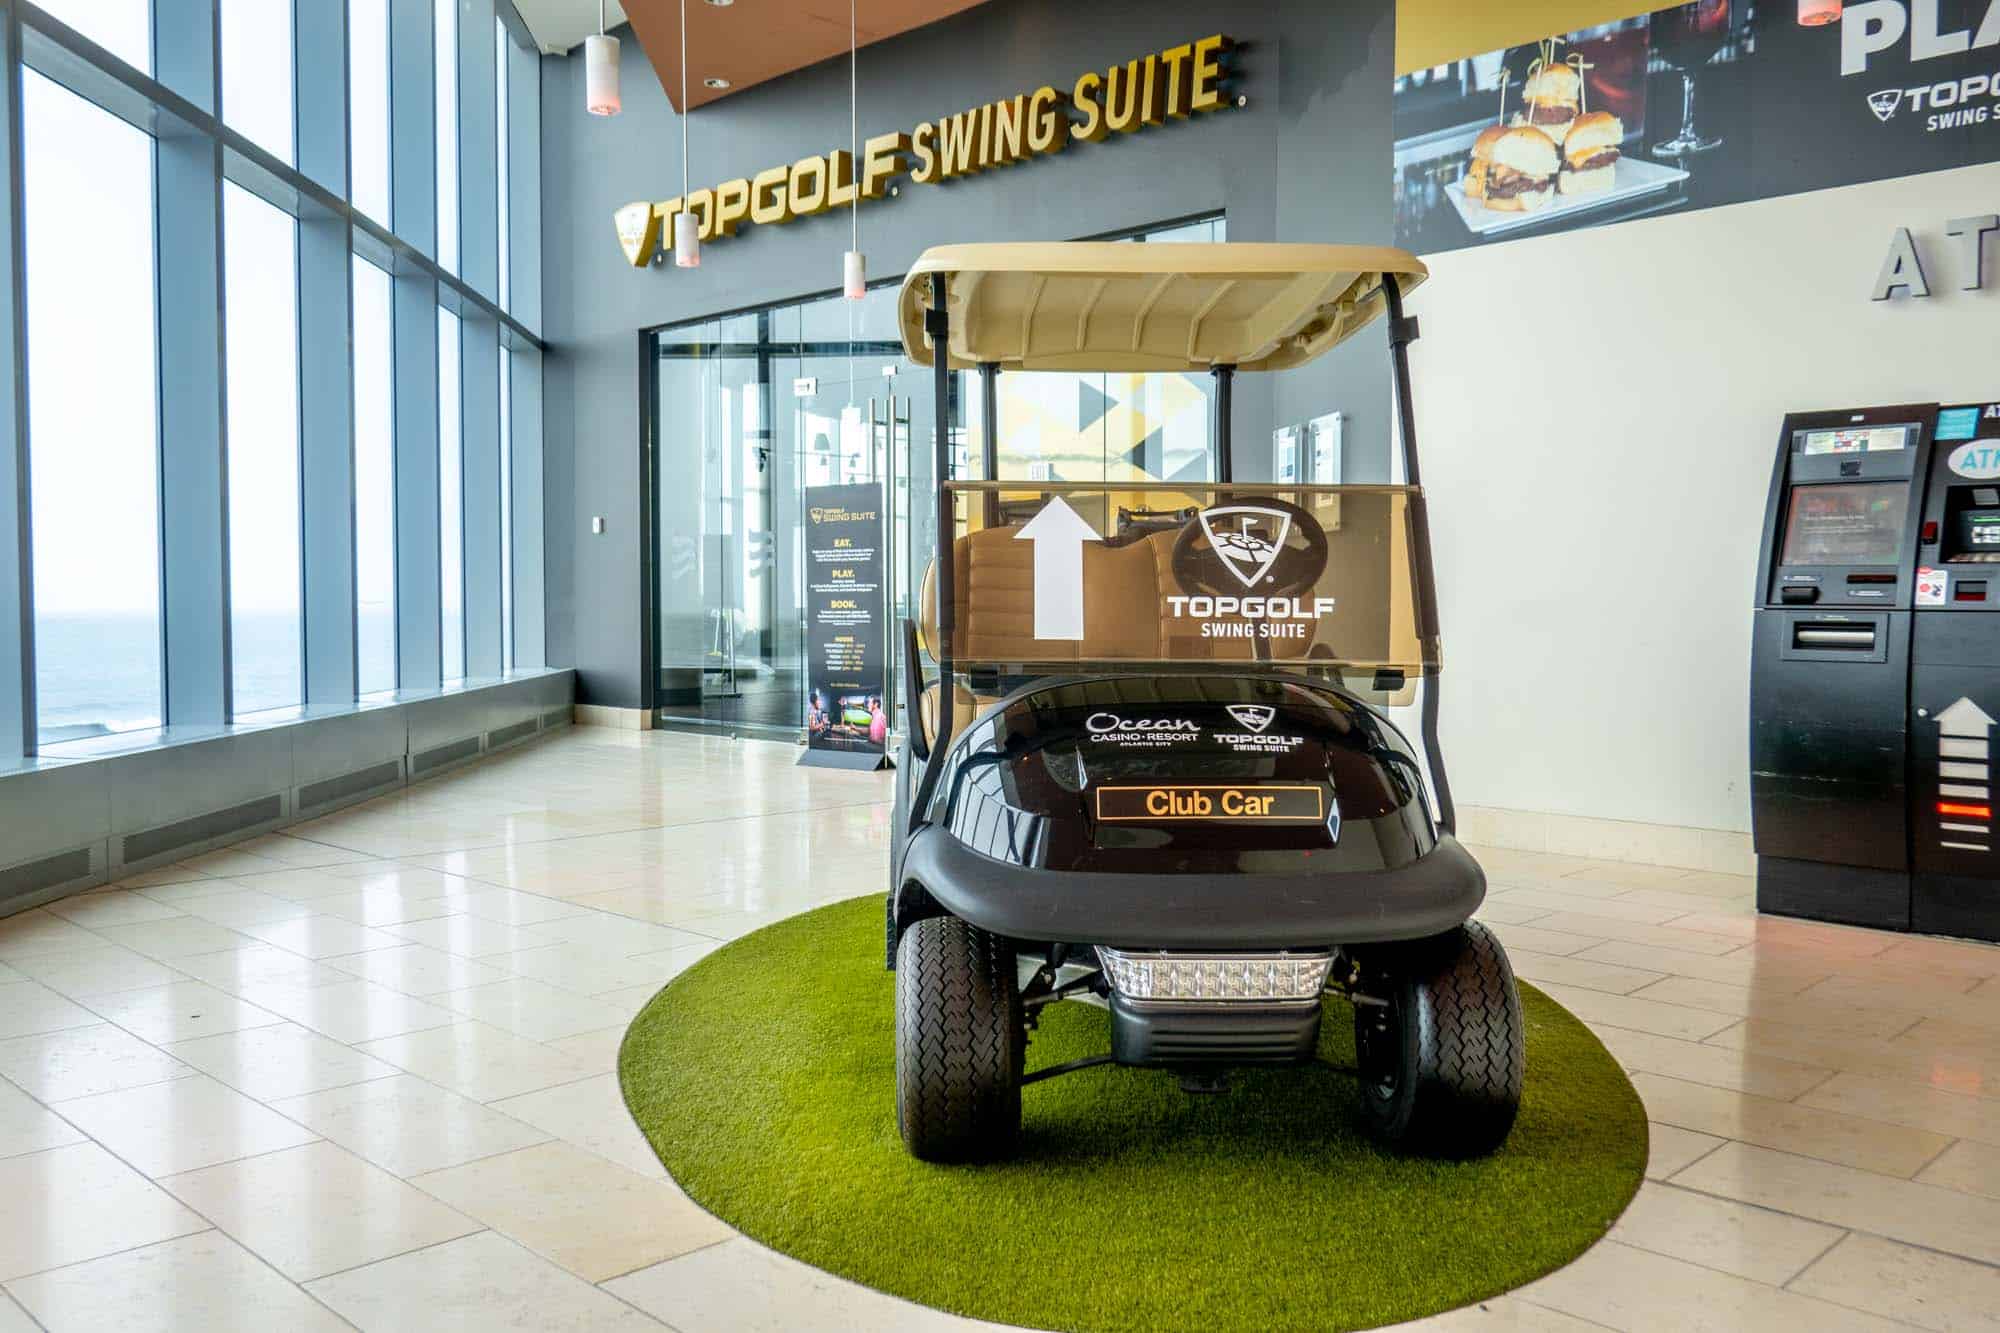 Golf cart outside a storefront with a sign for "Topgolf Swing Suite"